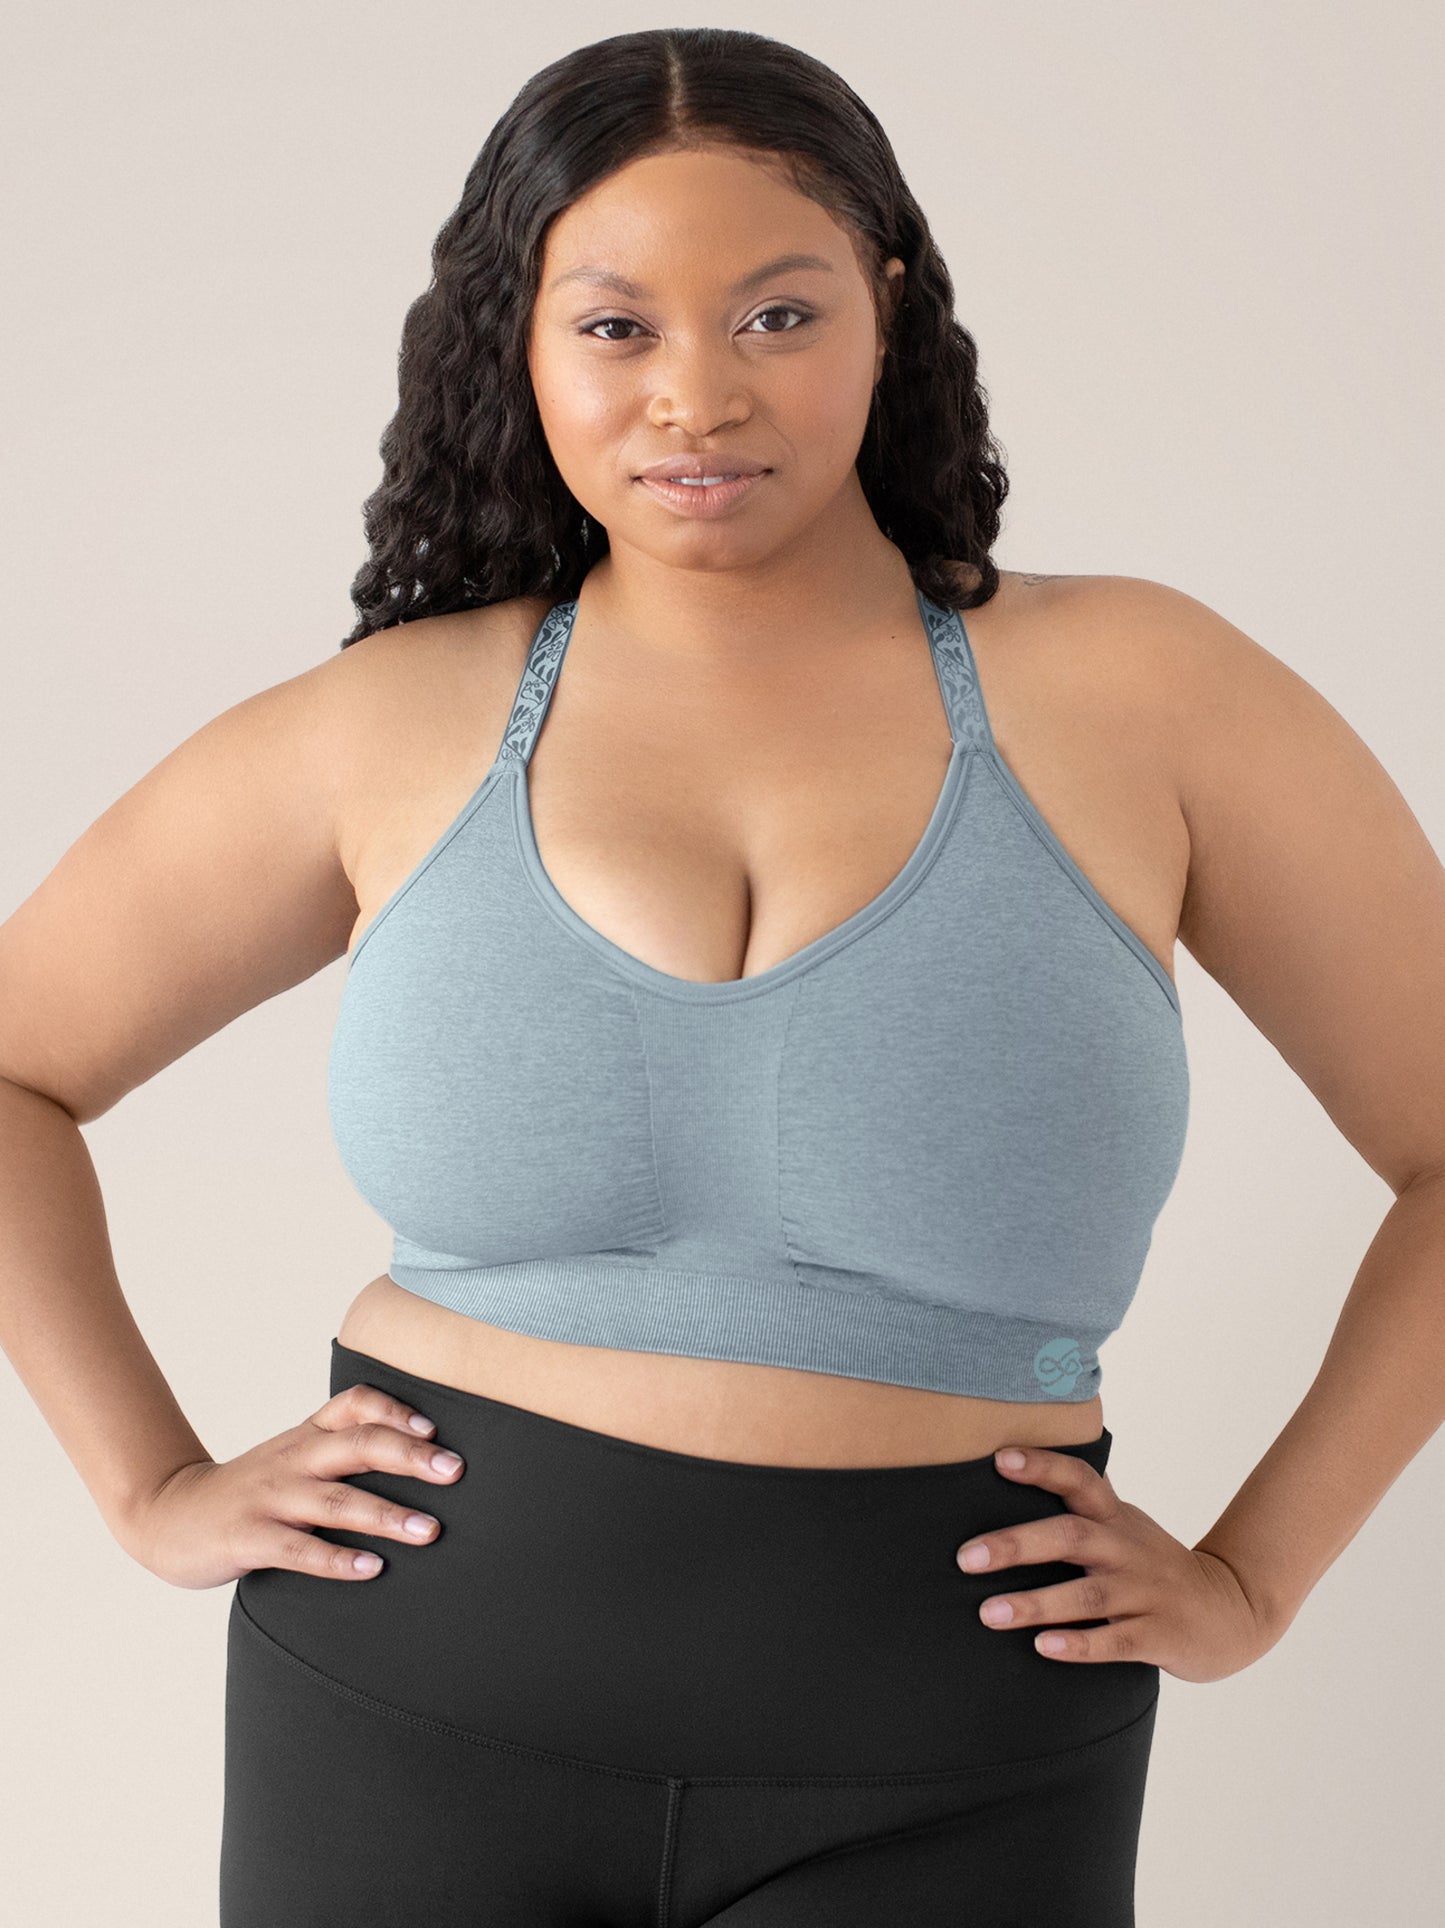 Model with her hands on her hips wearing the Diana Sublime® Sports Bra in Seaglass Heather